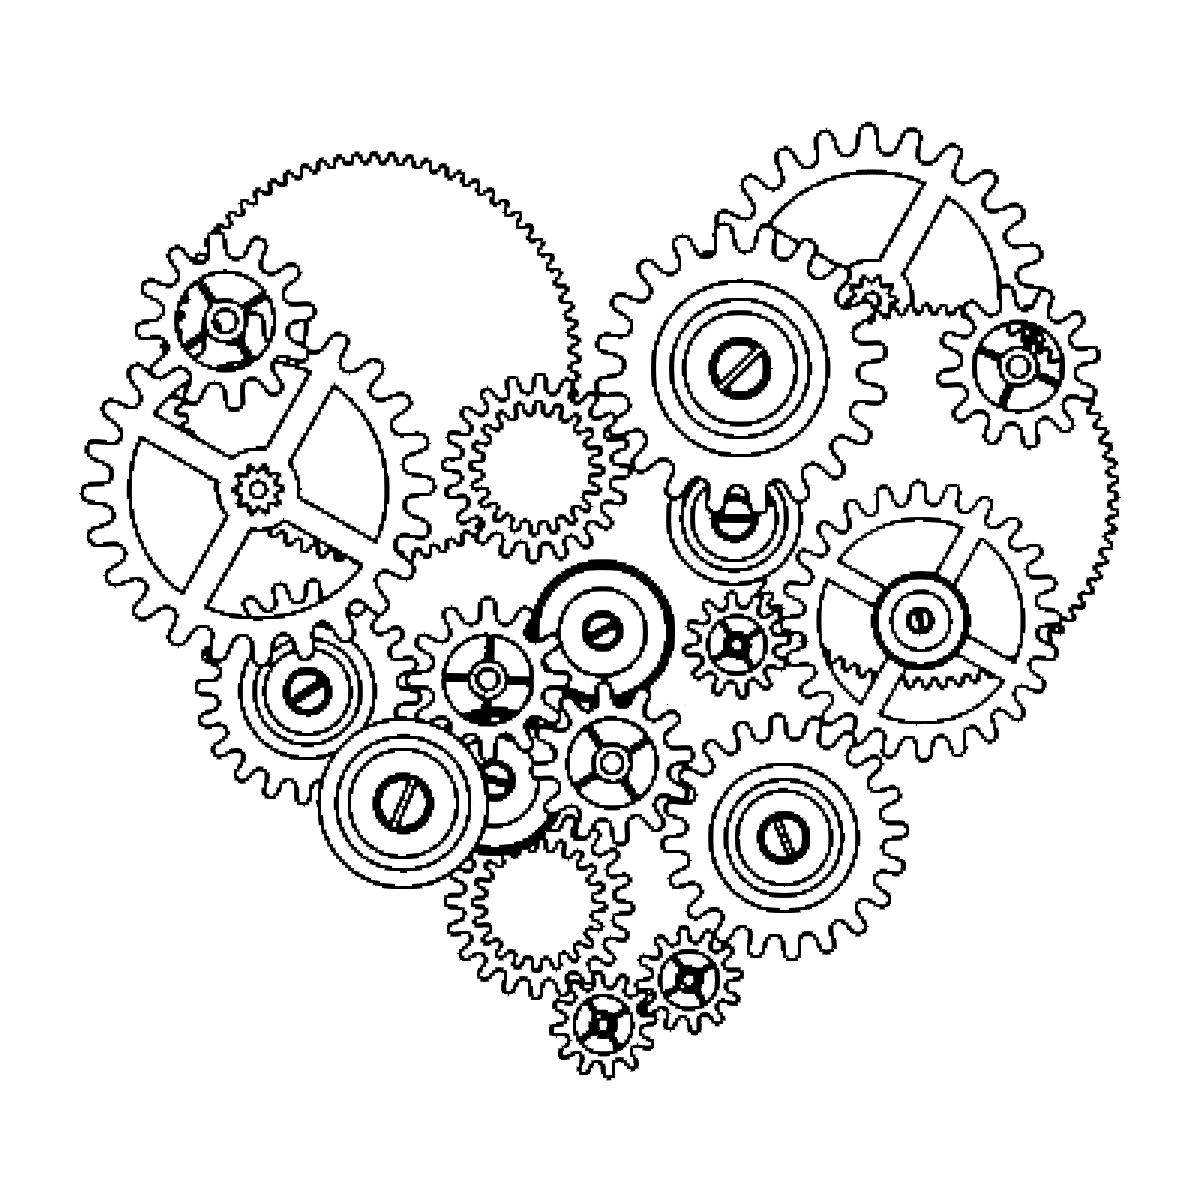 4841009-gear-love-heart-isolated-on-white-background